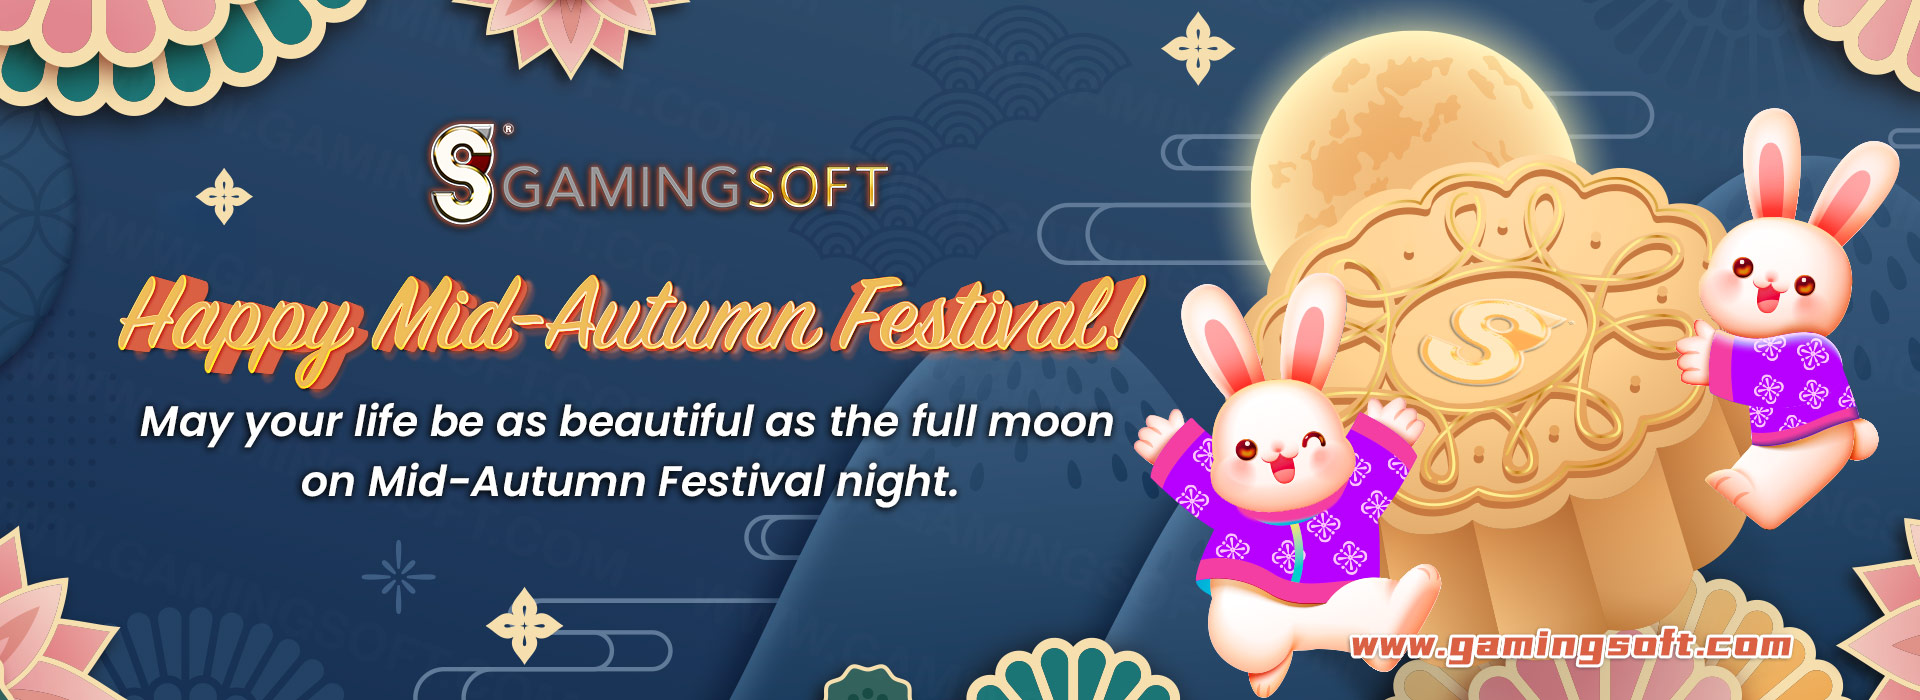 Happy Mid-Autumn Festival May your life be as beautiful as the full moon on Mid-Autumn Festival night Web Banner - GamingSoft